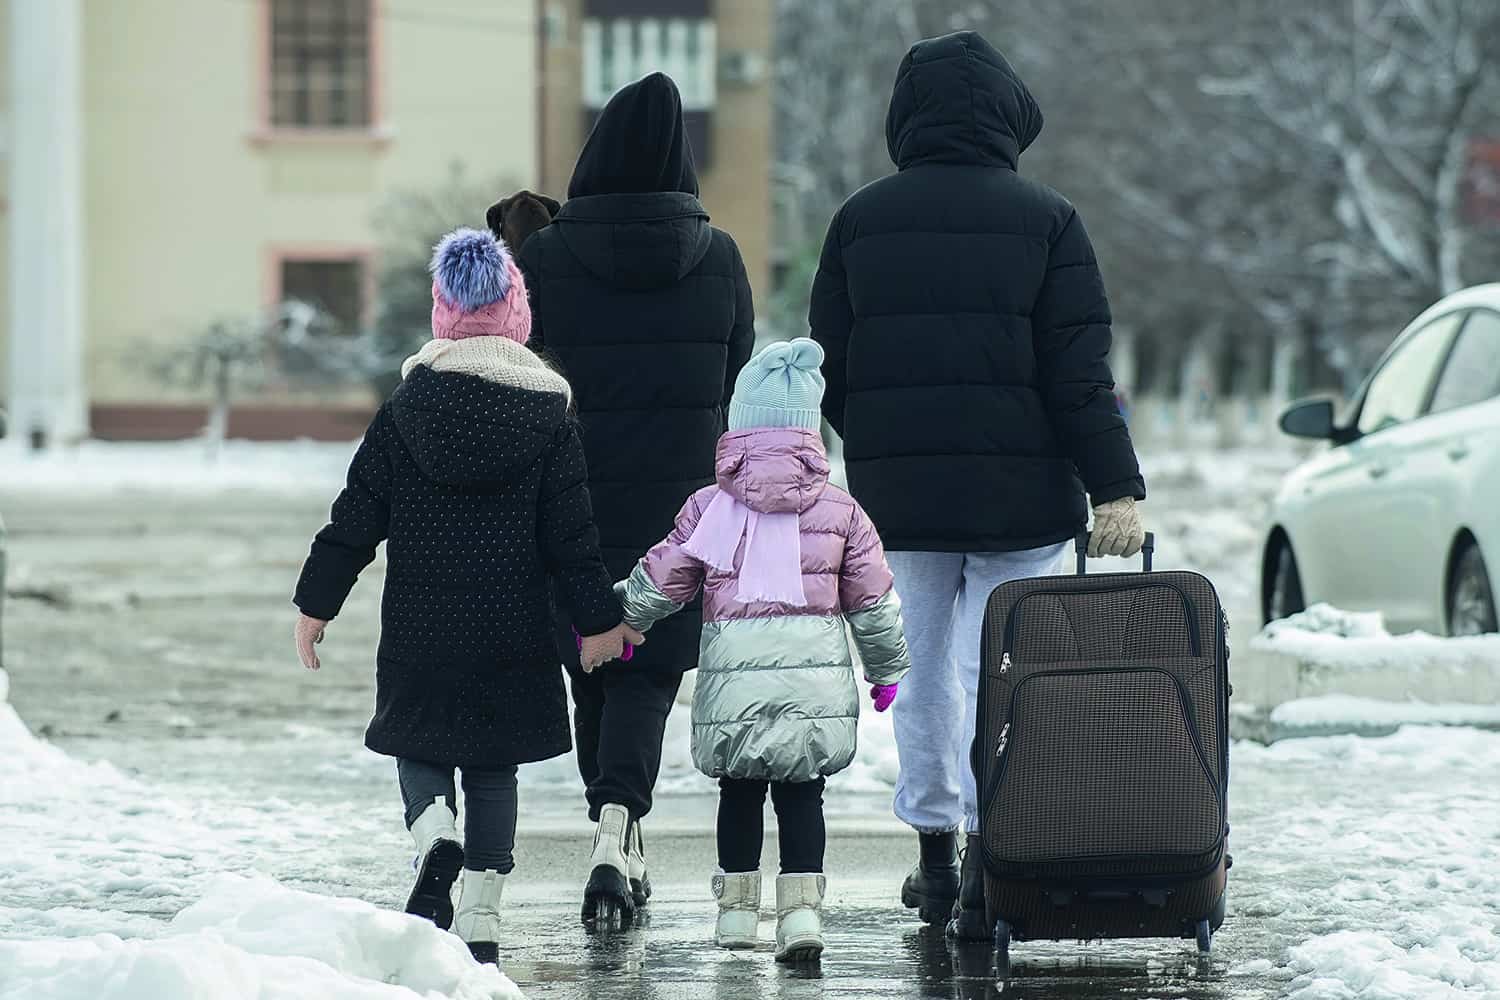 A family walking in the snow pulling a suitcase.